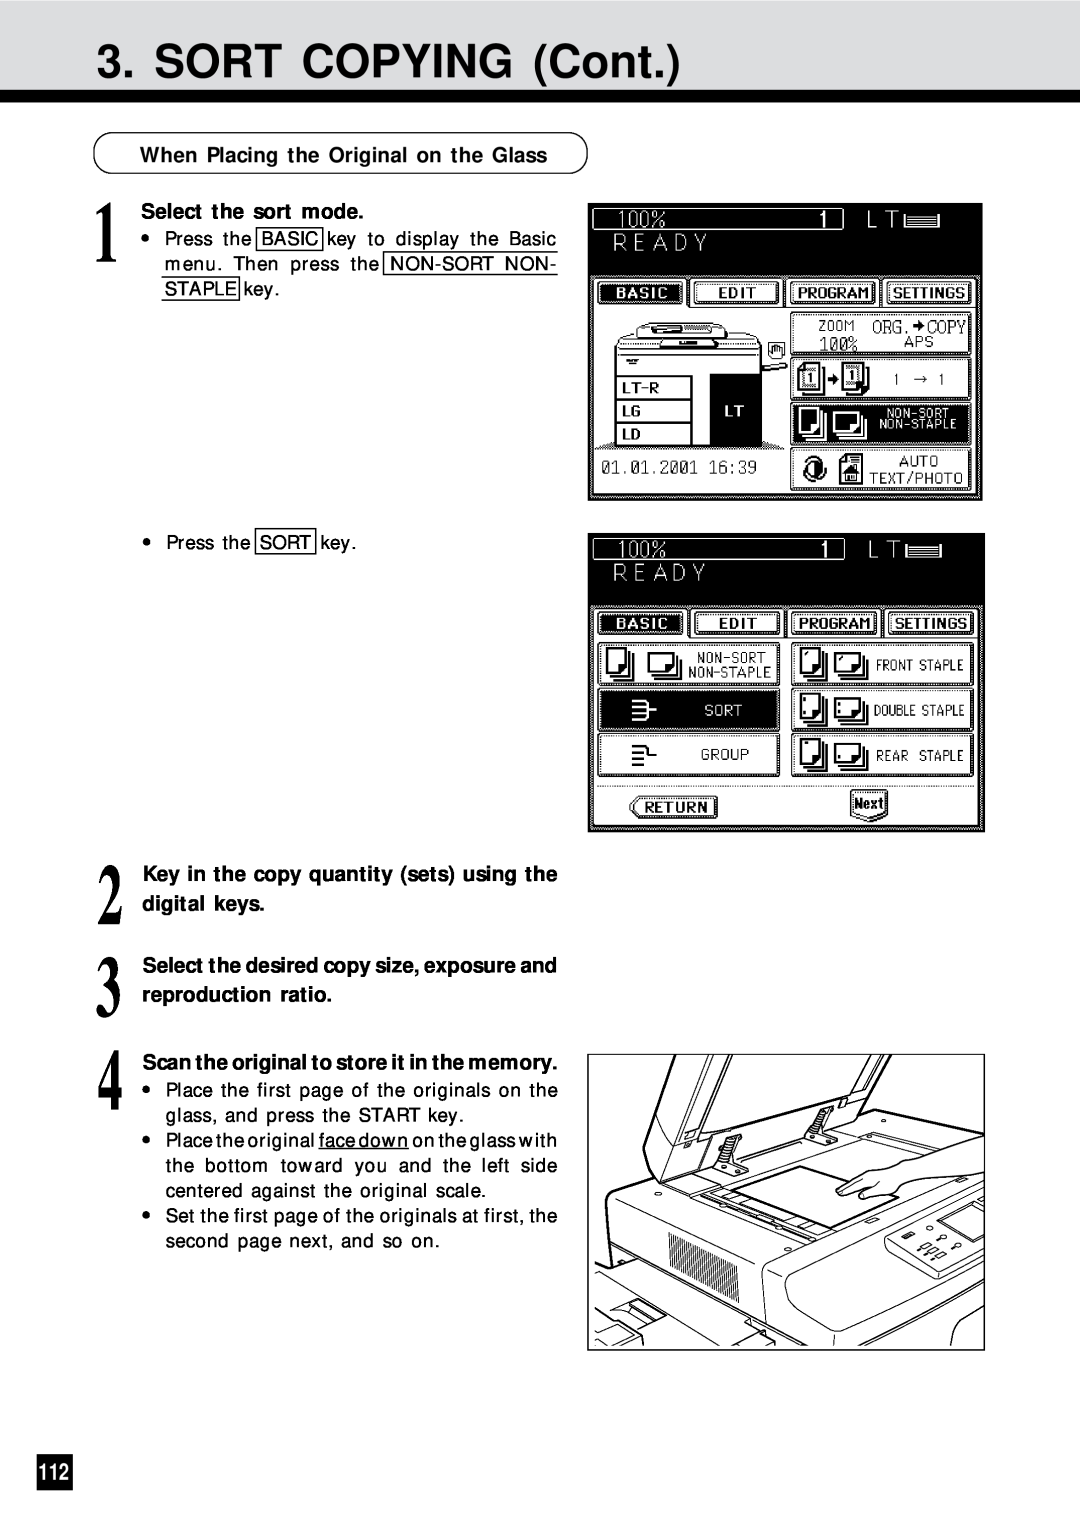 Sharp AR-650 operation manual SORT COPYING Cont, When Placing the Original on the Glass 1 Select the sort mode 